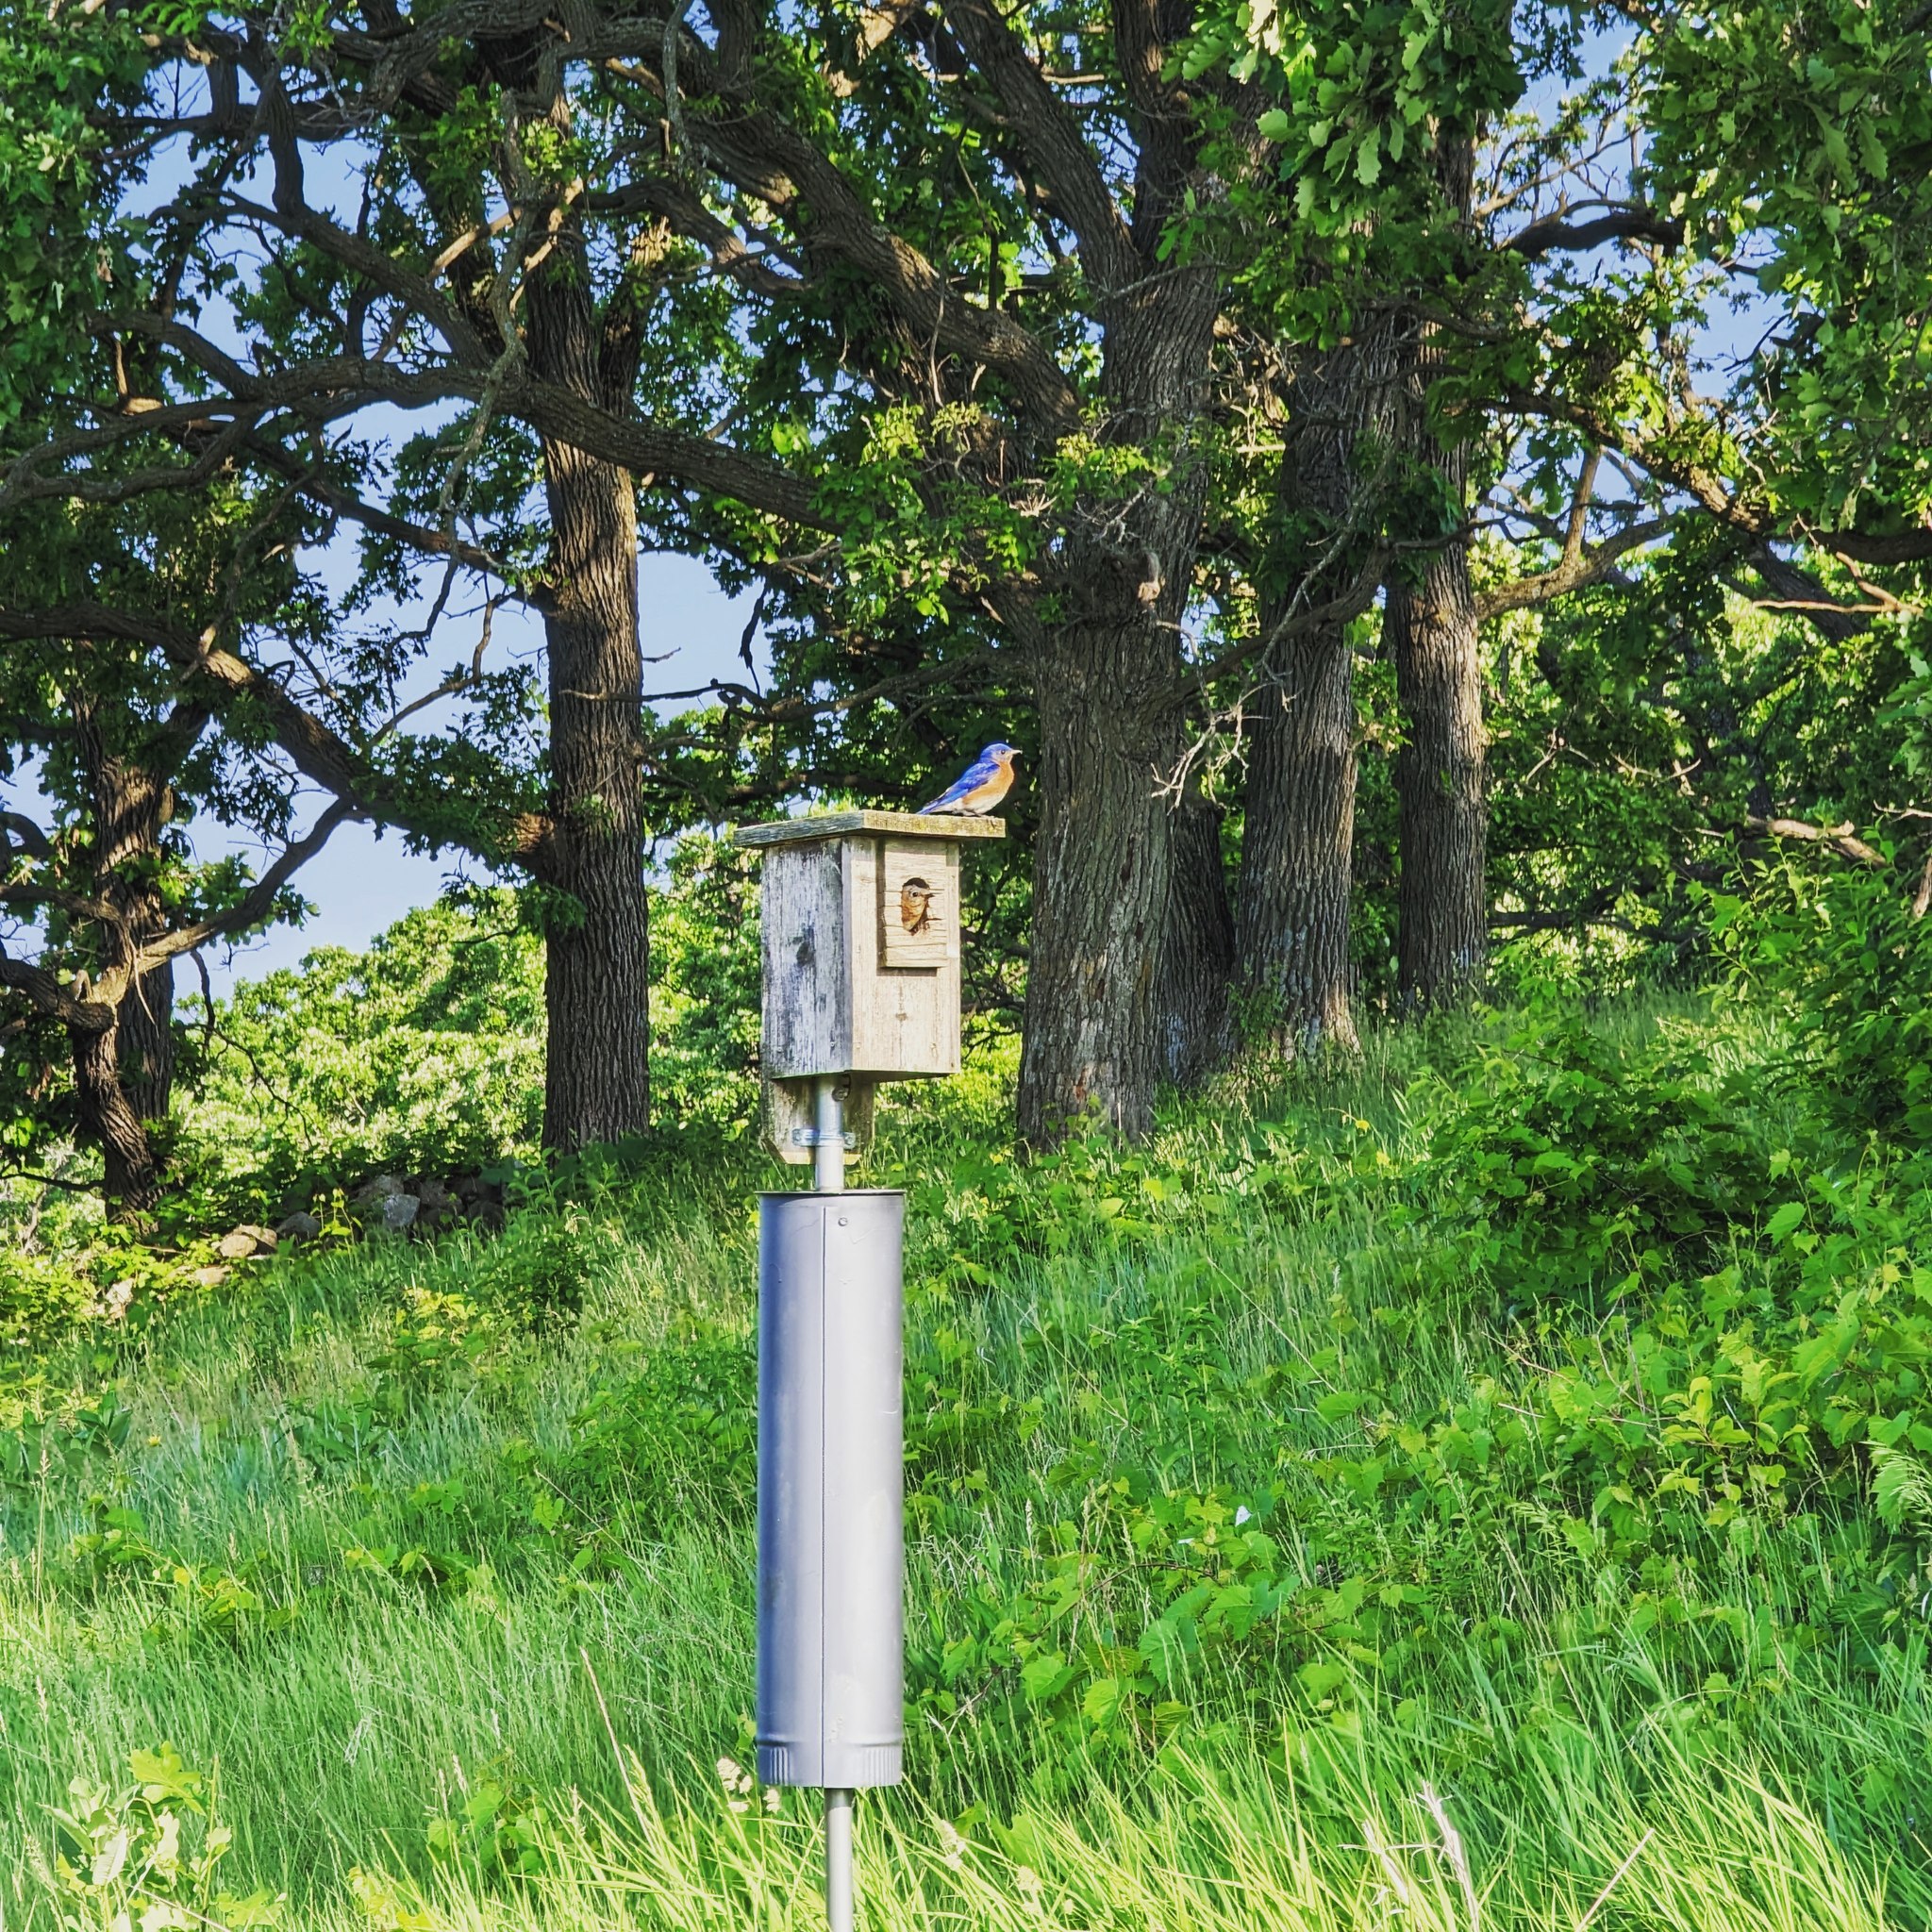 A bird perched on a wooden birdhouse mounted on a metal pole in a lush green area with large trees in the background.